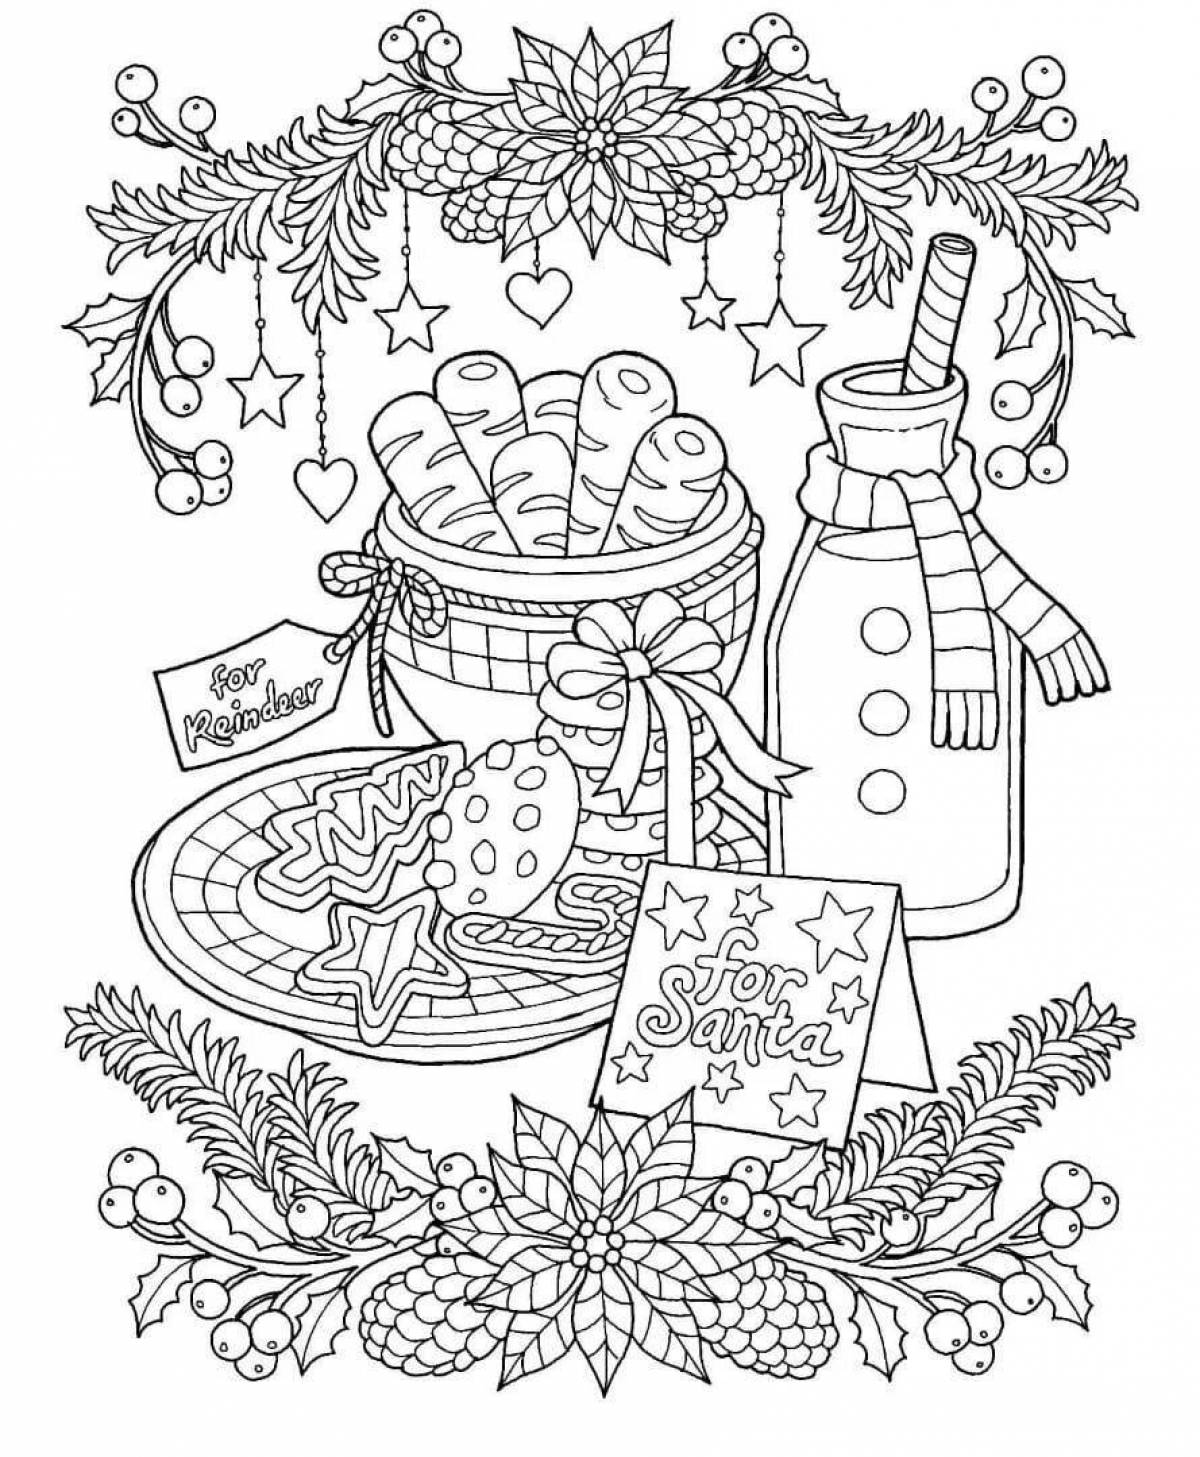 Rampant Christmas coloring book for adults